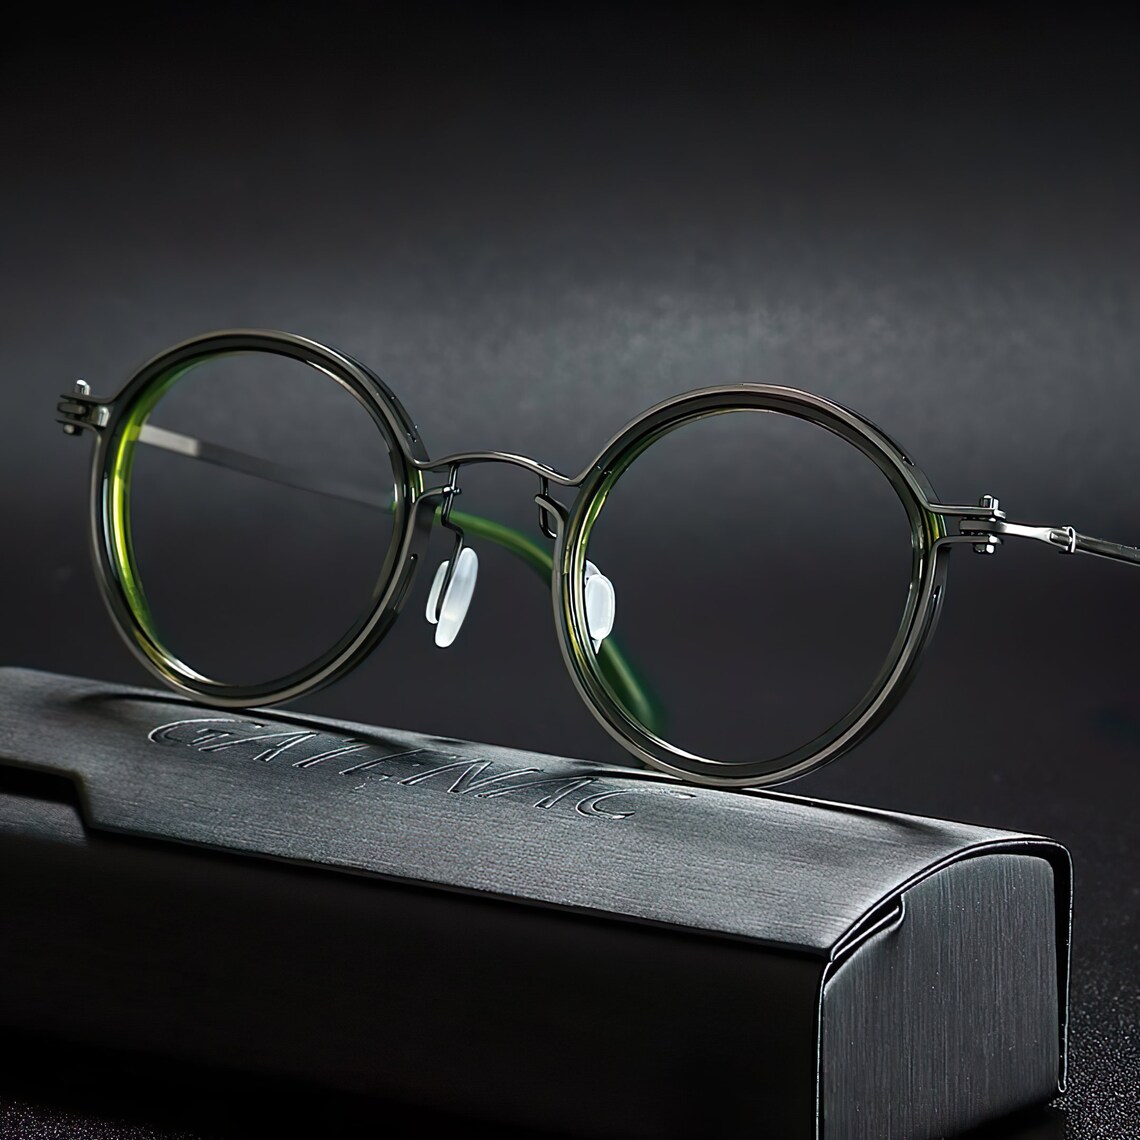 Handcrafted Vintage Glasses Frames: Clear, Titanium, Metal, Circle, and ...